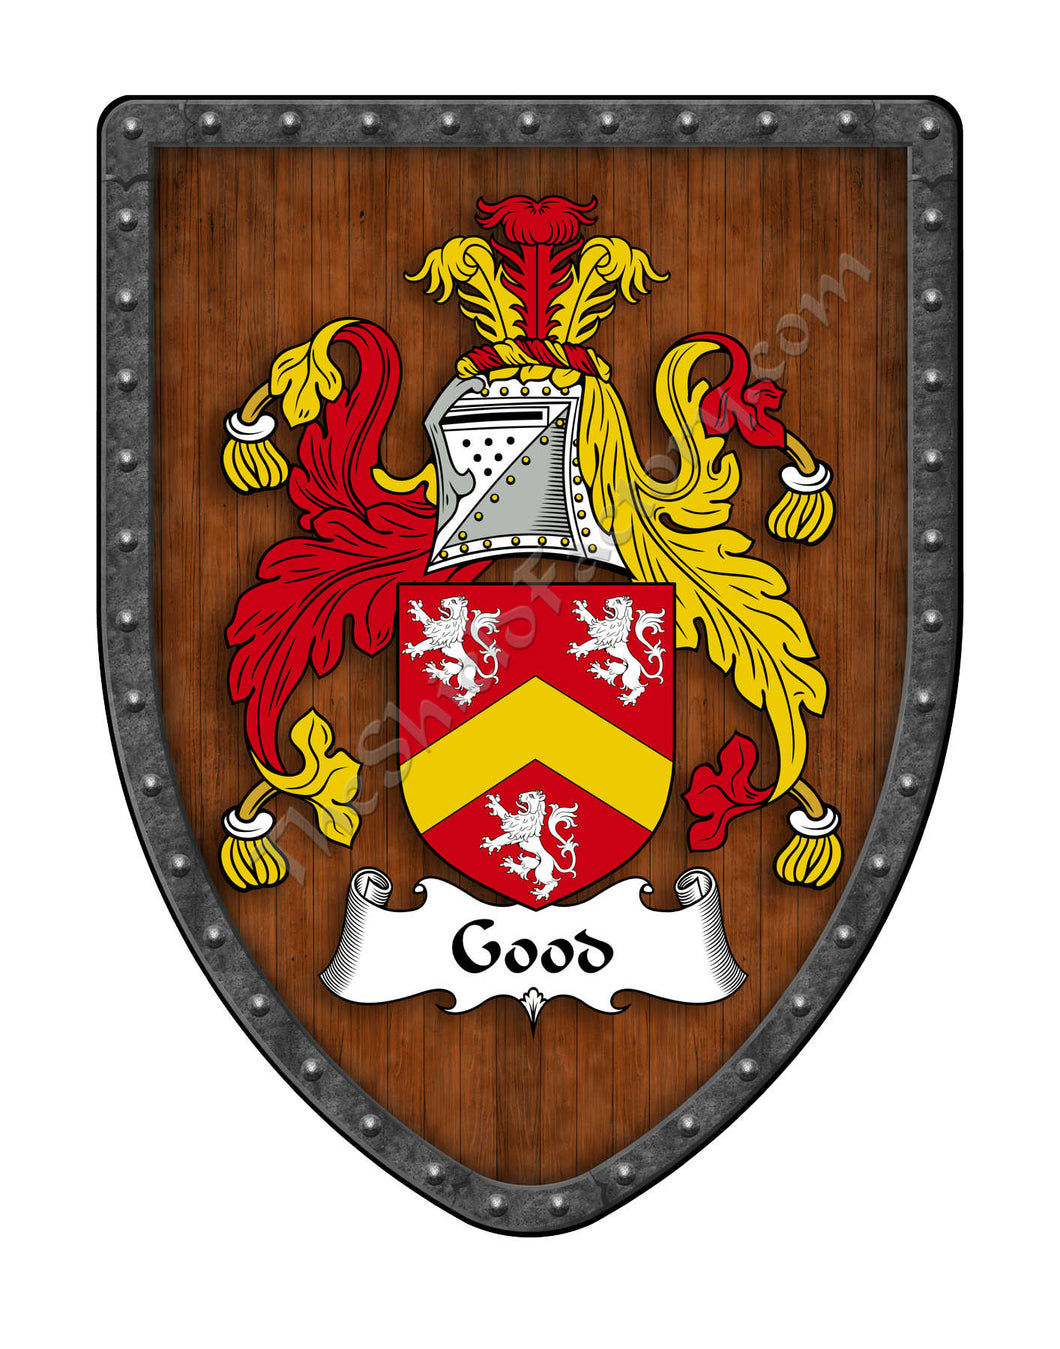 Good Family Crest Coat of Arms